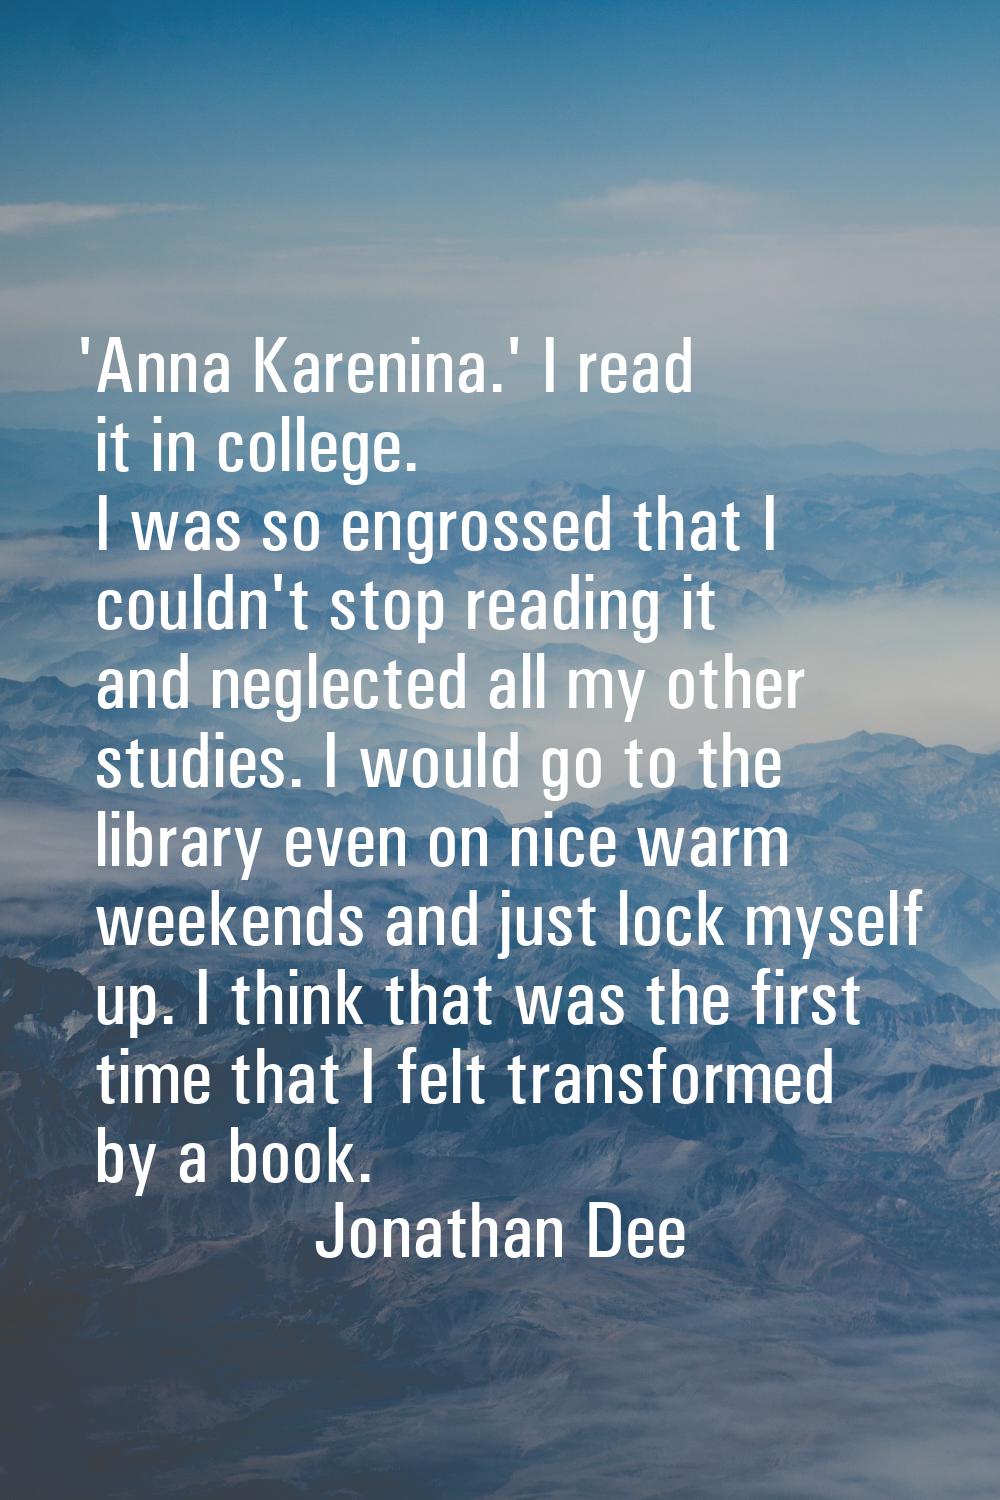 'Anna Karenina.' I read it in college. I was so engrossed that I couldn't stop reading it and negle